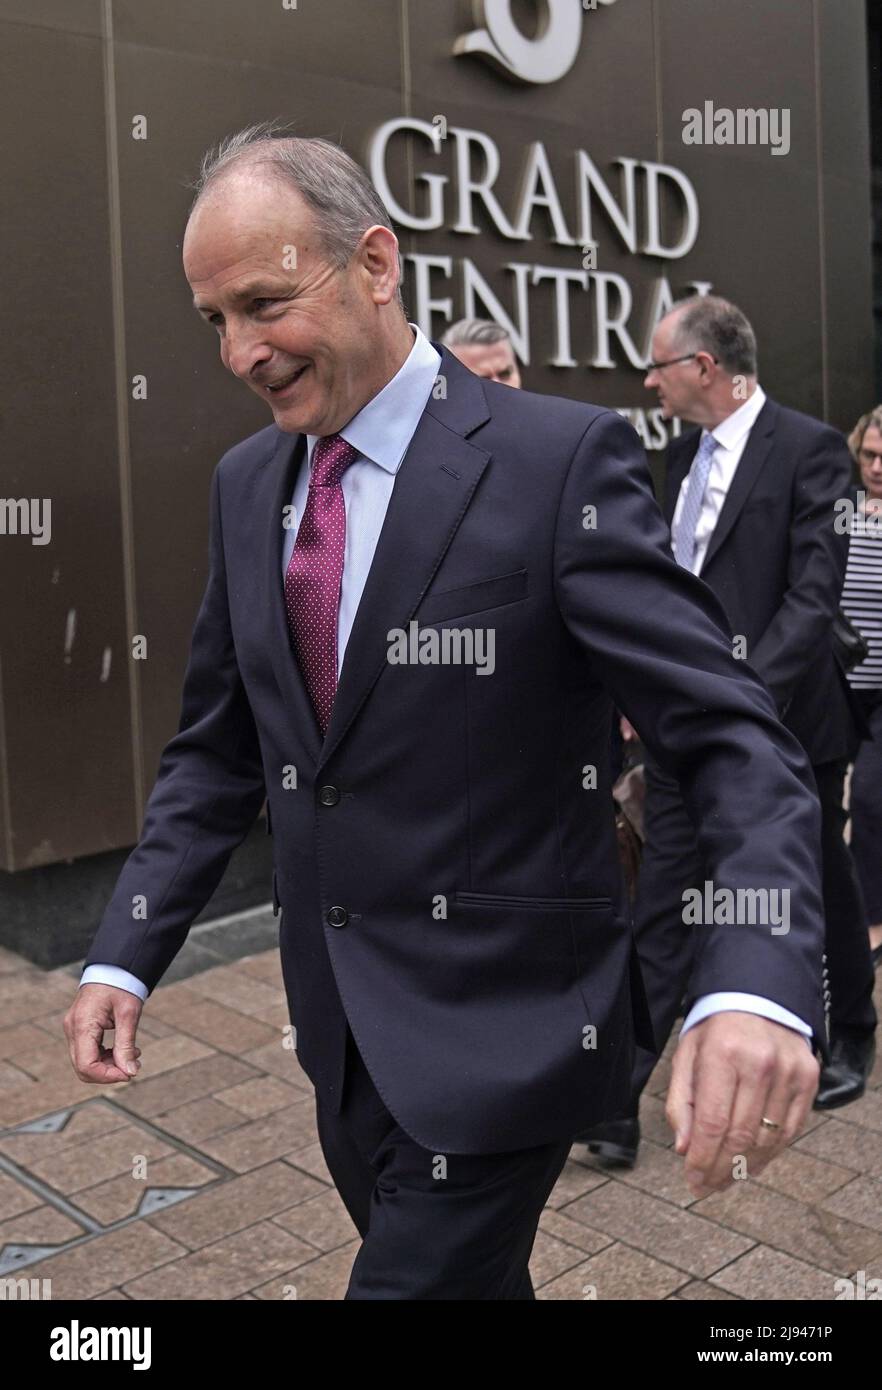 Taoiseach Micheal Martin leaves the Grand Central Hotel, during a visit to Belfast for NI protocol talks with Stormont leaders and meet business representatives. Picture date: Friday May 20, 2022. Stock Photo